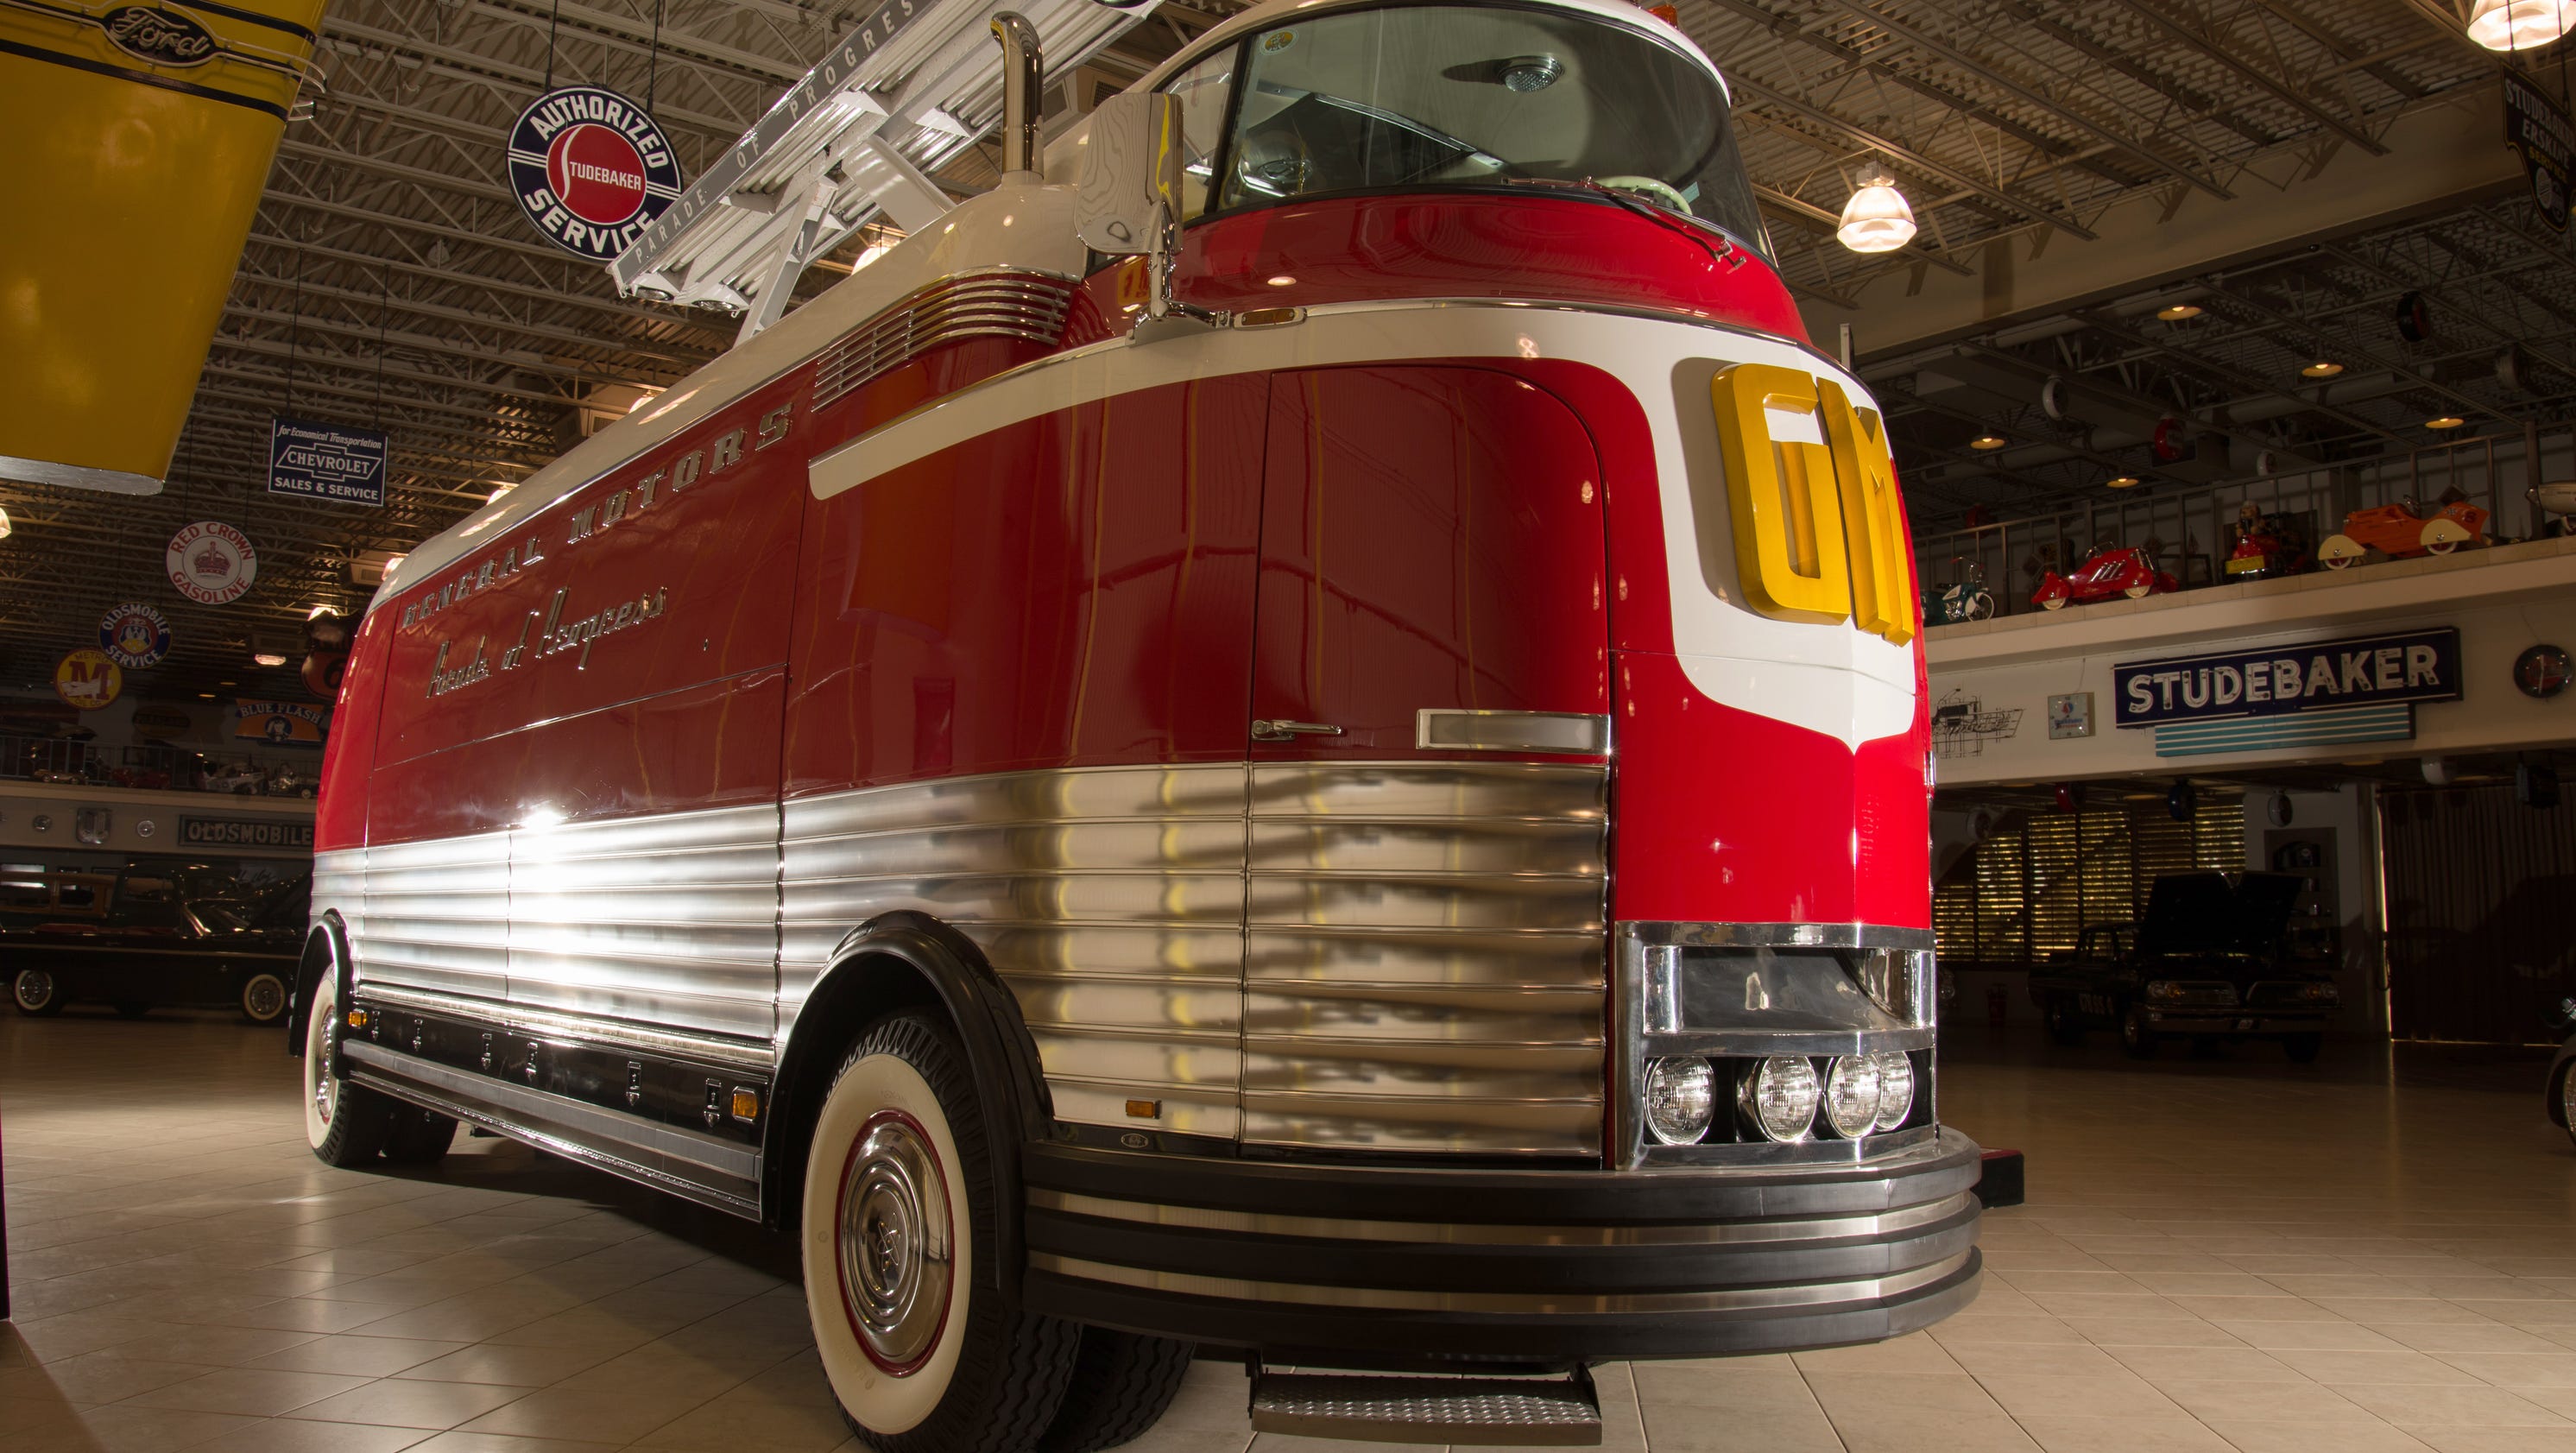 GM Futurliner bus to be auctioned at Barrett-Jackson